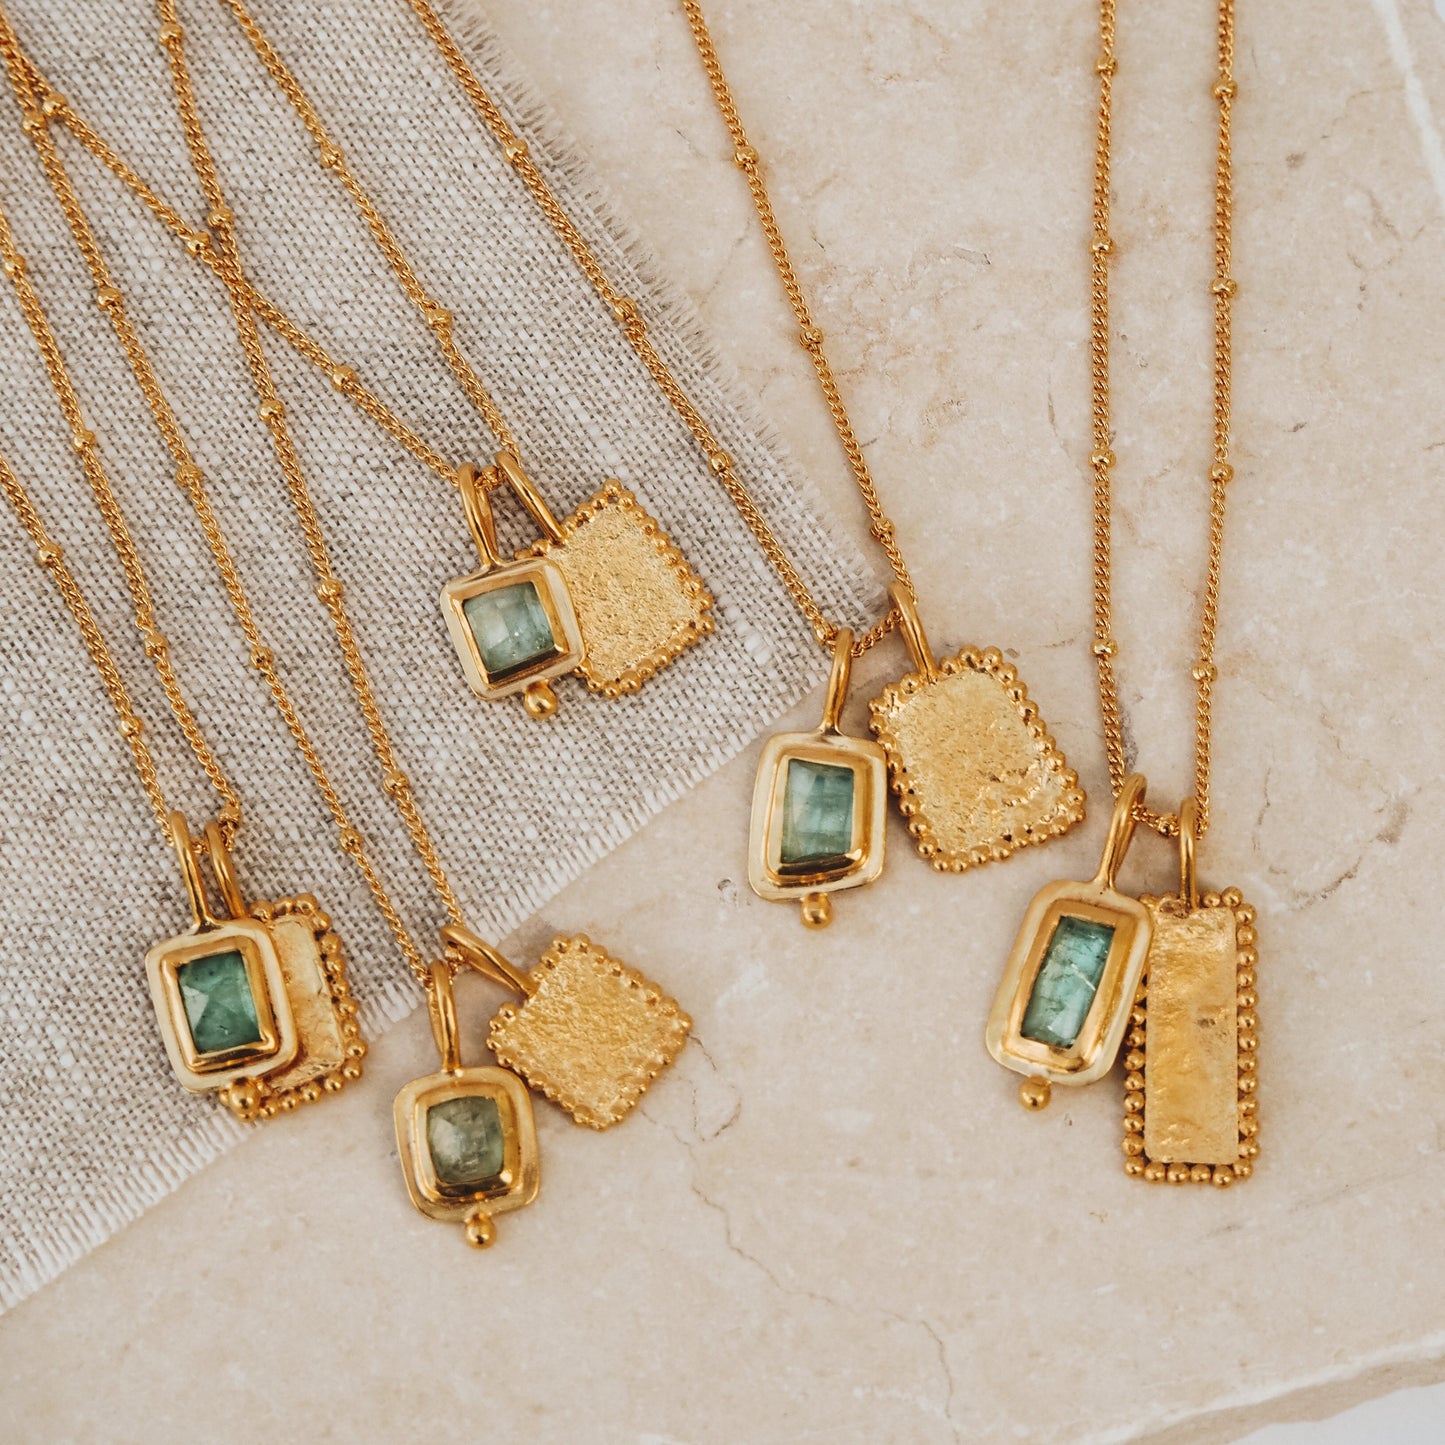 Collection of artisan-crafted rich gold necklaces, each with a square pendant embellished with an enchanting ocean blue rose cut tourmaline gemstone, textured surfaces, and delicate granulation accents.